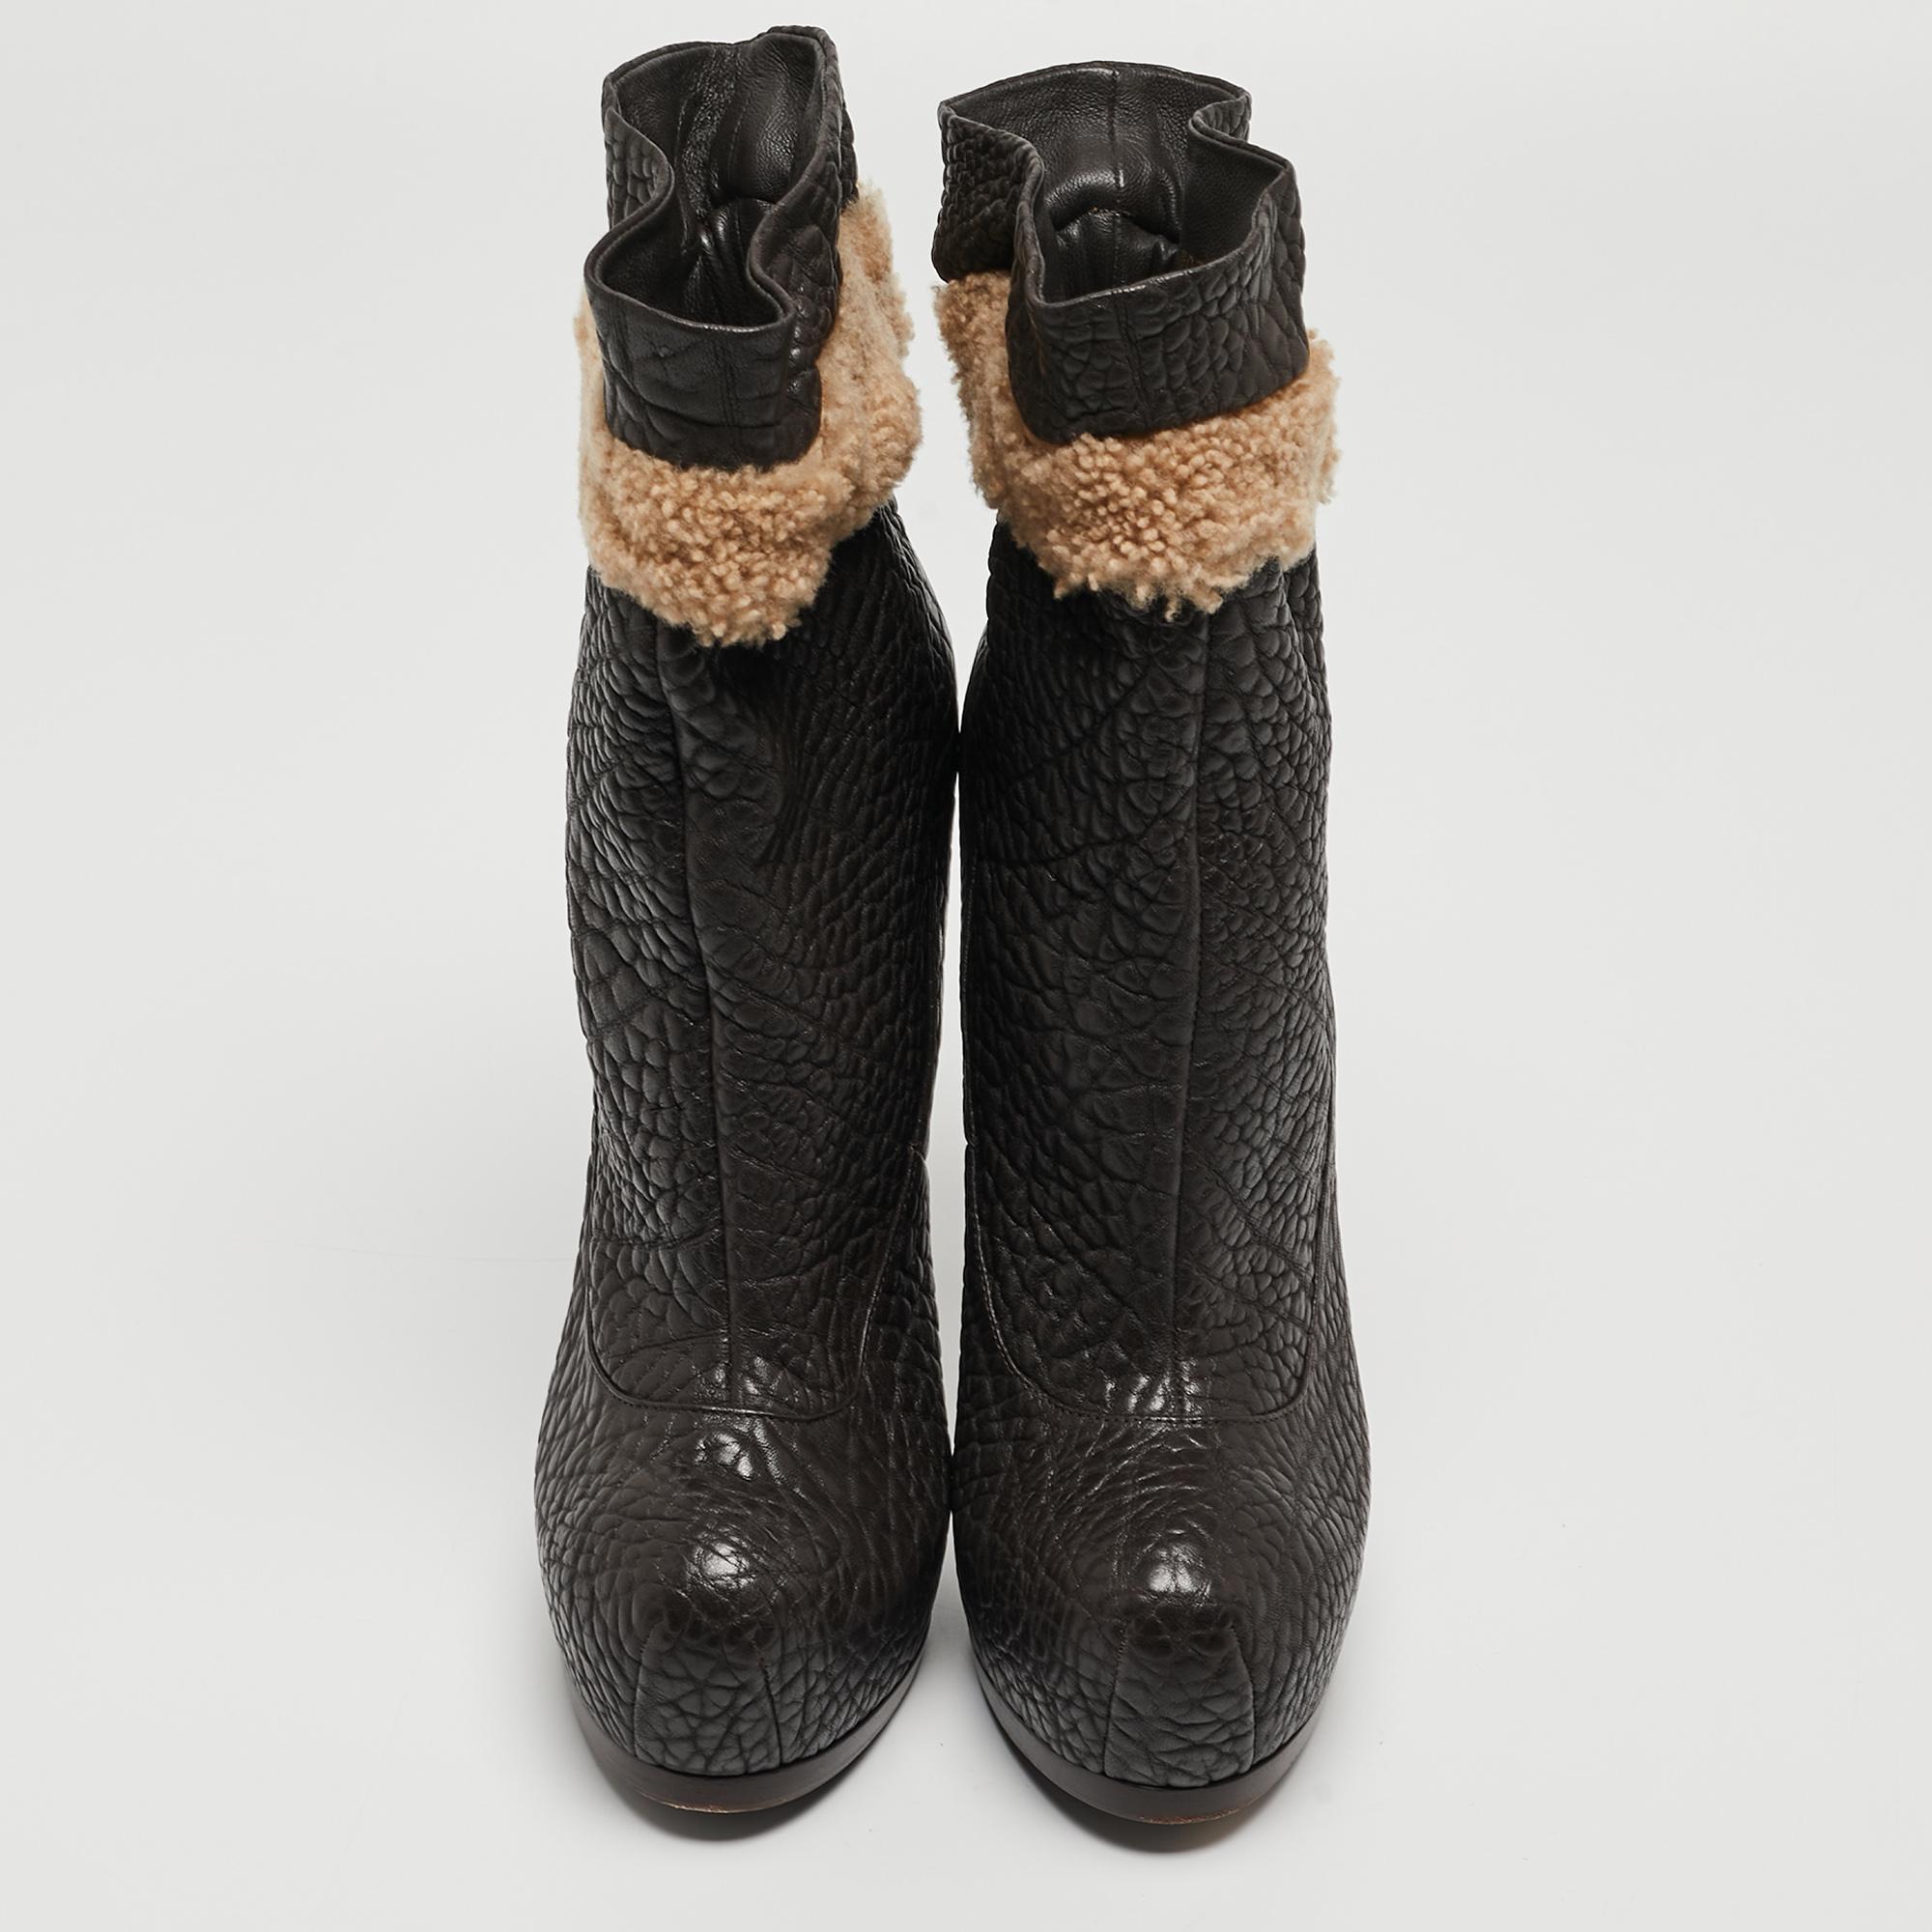 Nail a confident look with these designer ankle boots from Yves Saint Laurent! They're made of textured leather and added with contrasting fur-like trims, platforms, and 14 cm heels.

Includes
Original Dustbag